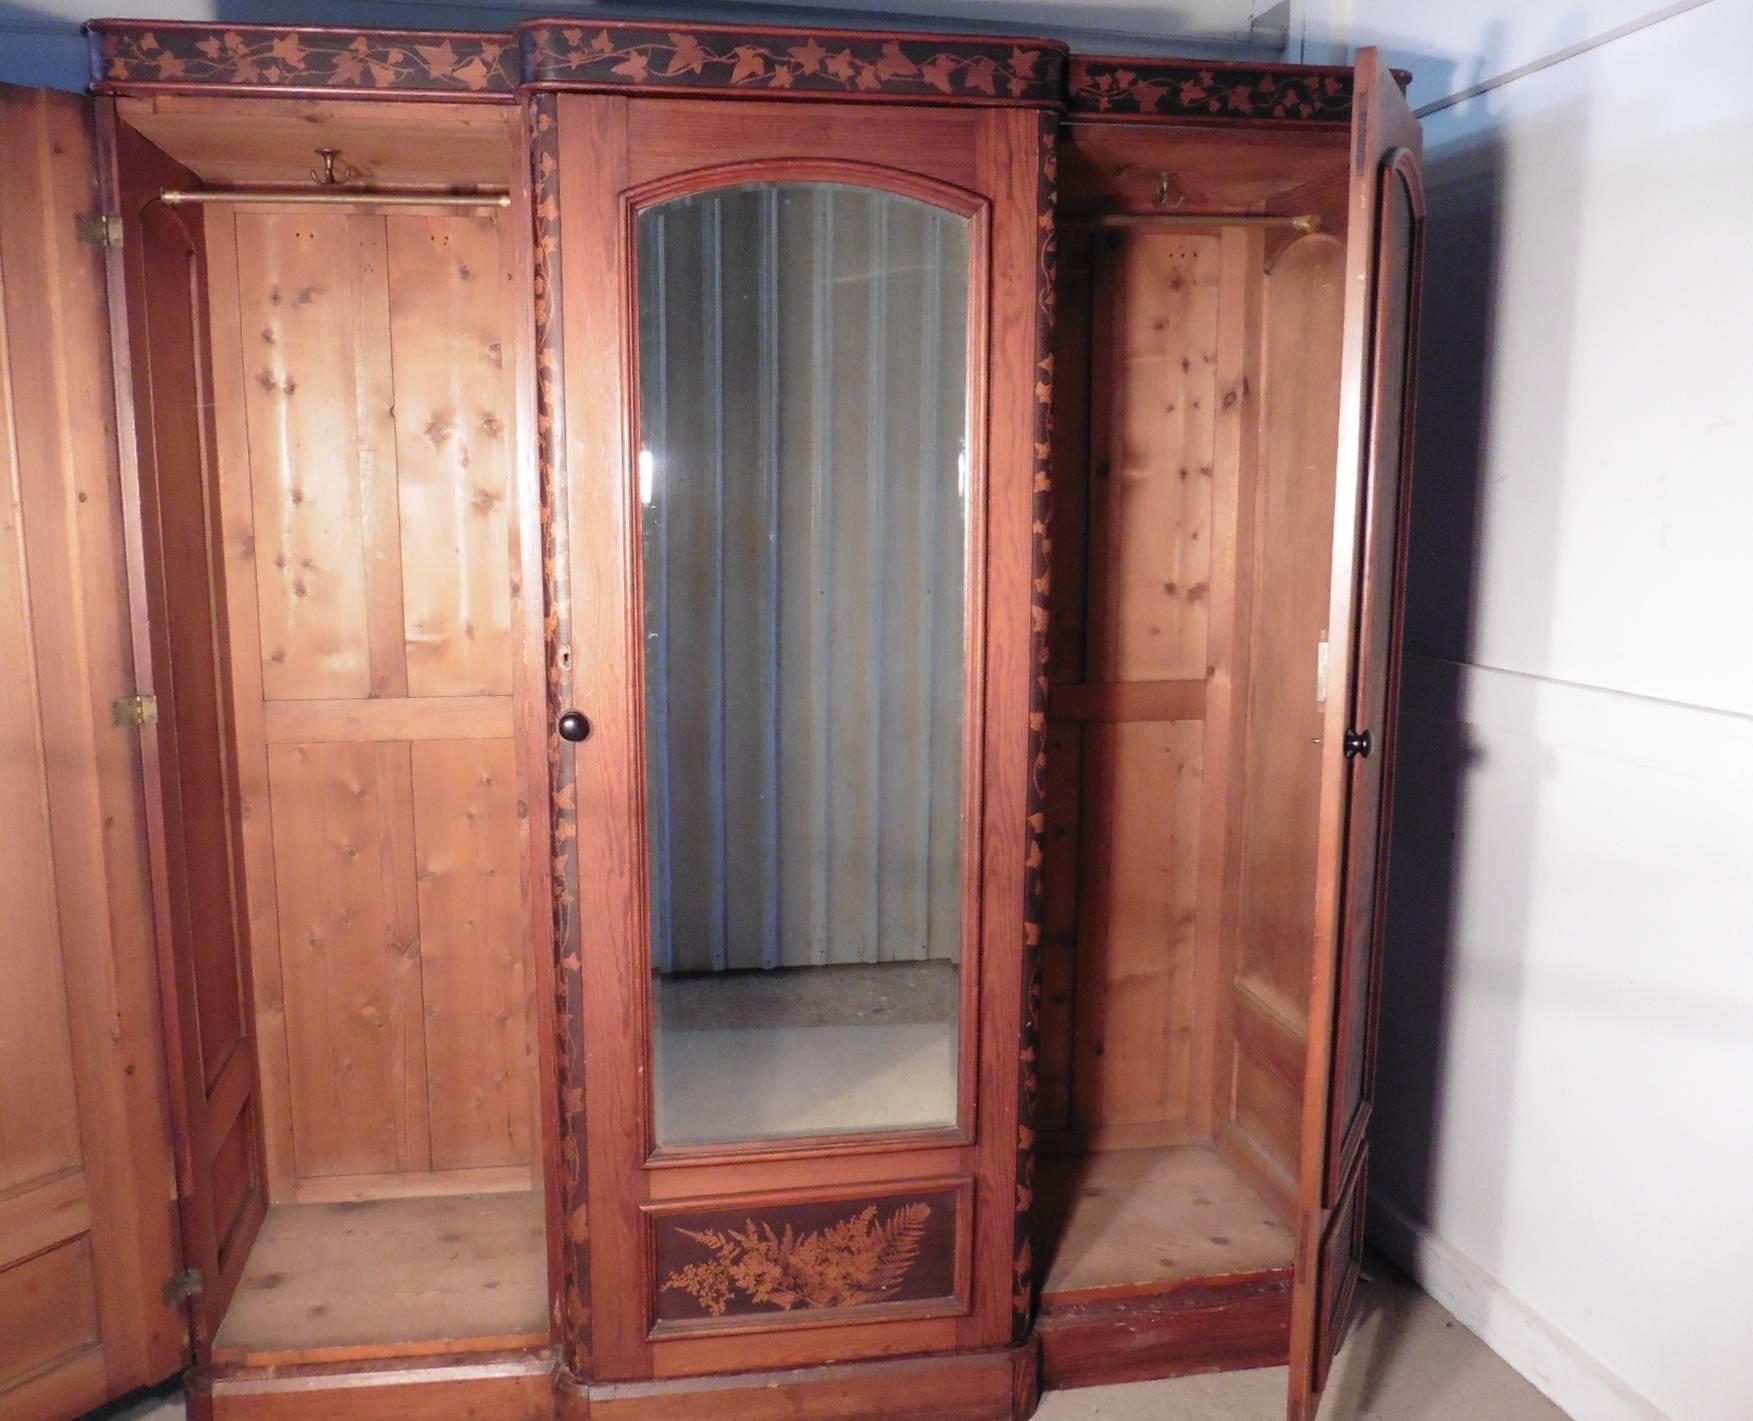 Cold-Painted Victorian Painted Pine Arts & Crafts Wardrobe Decorated with Ferns and Leaves